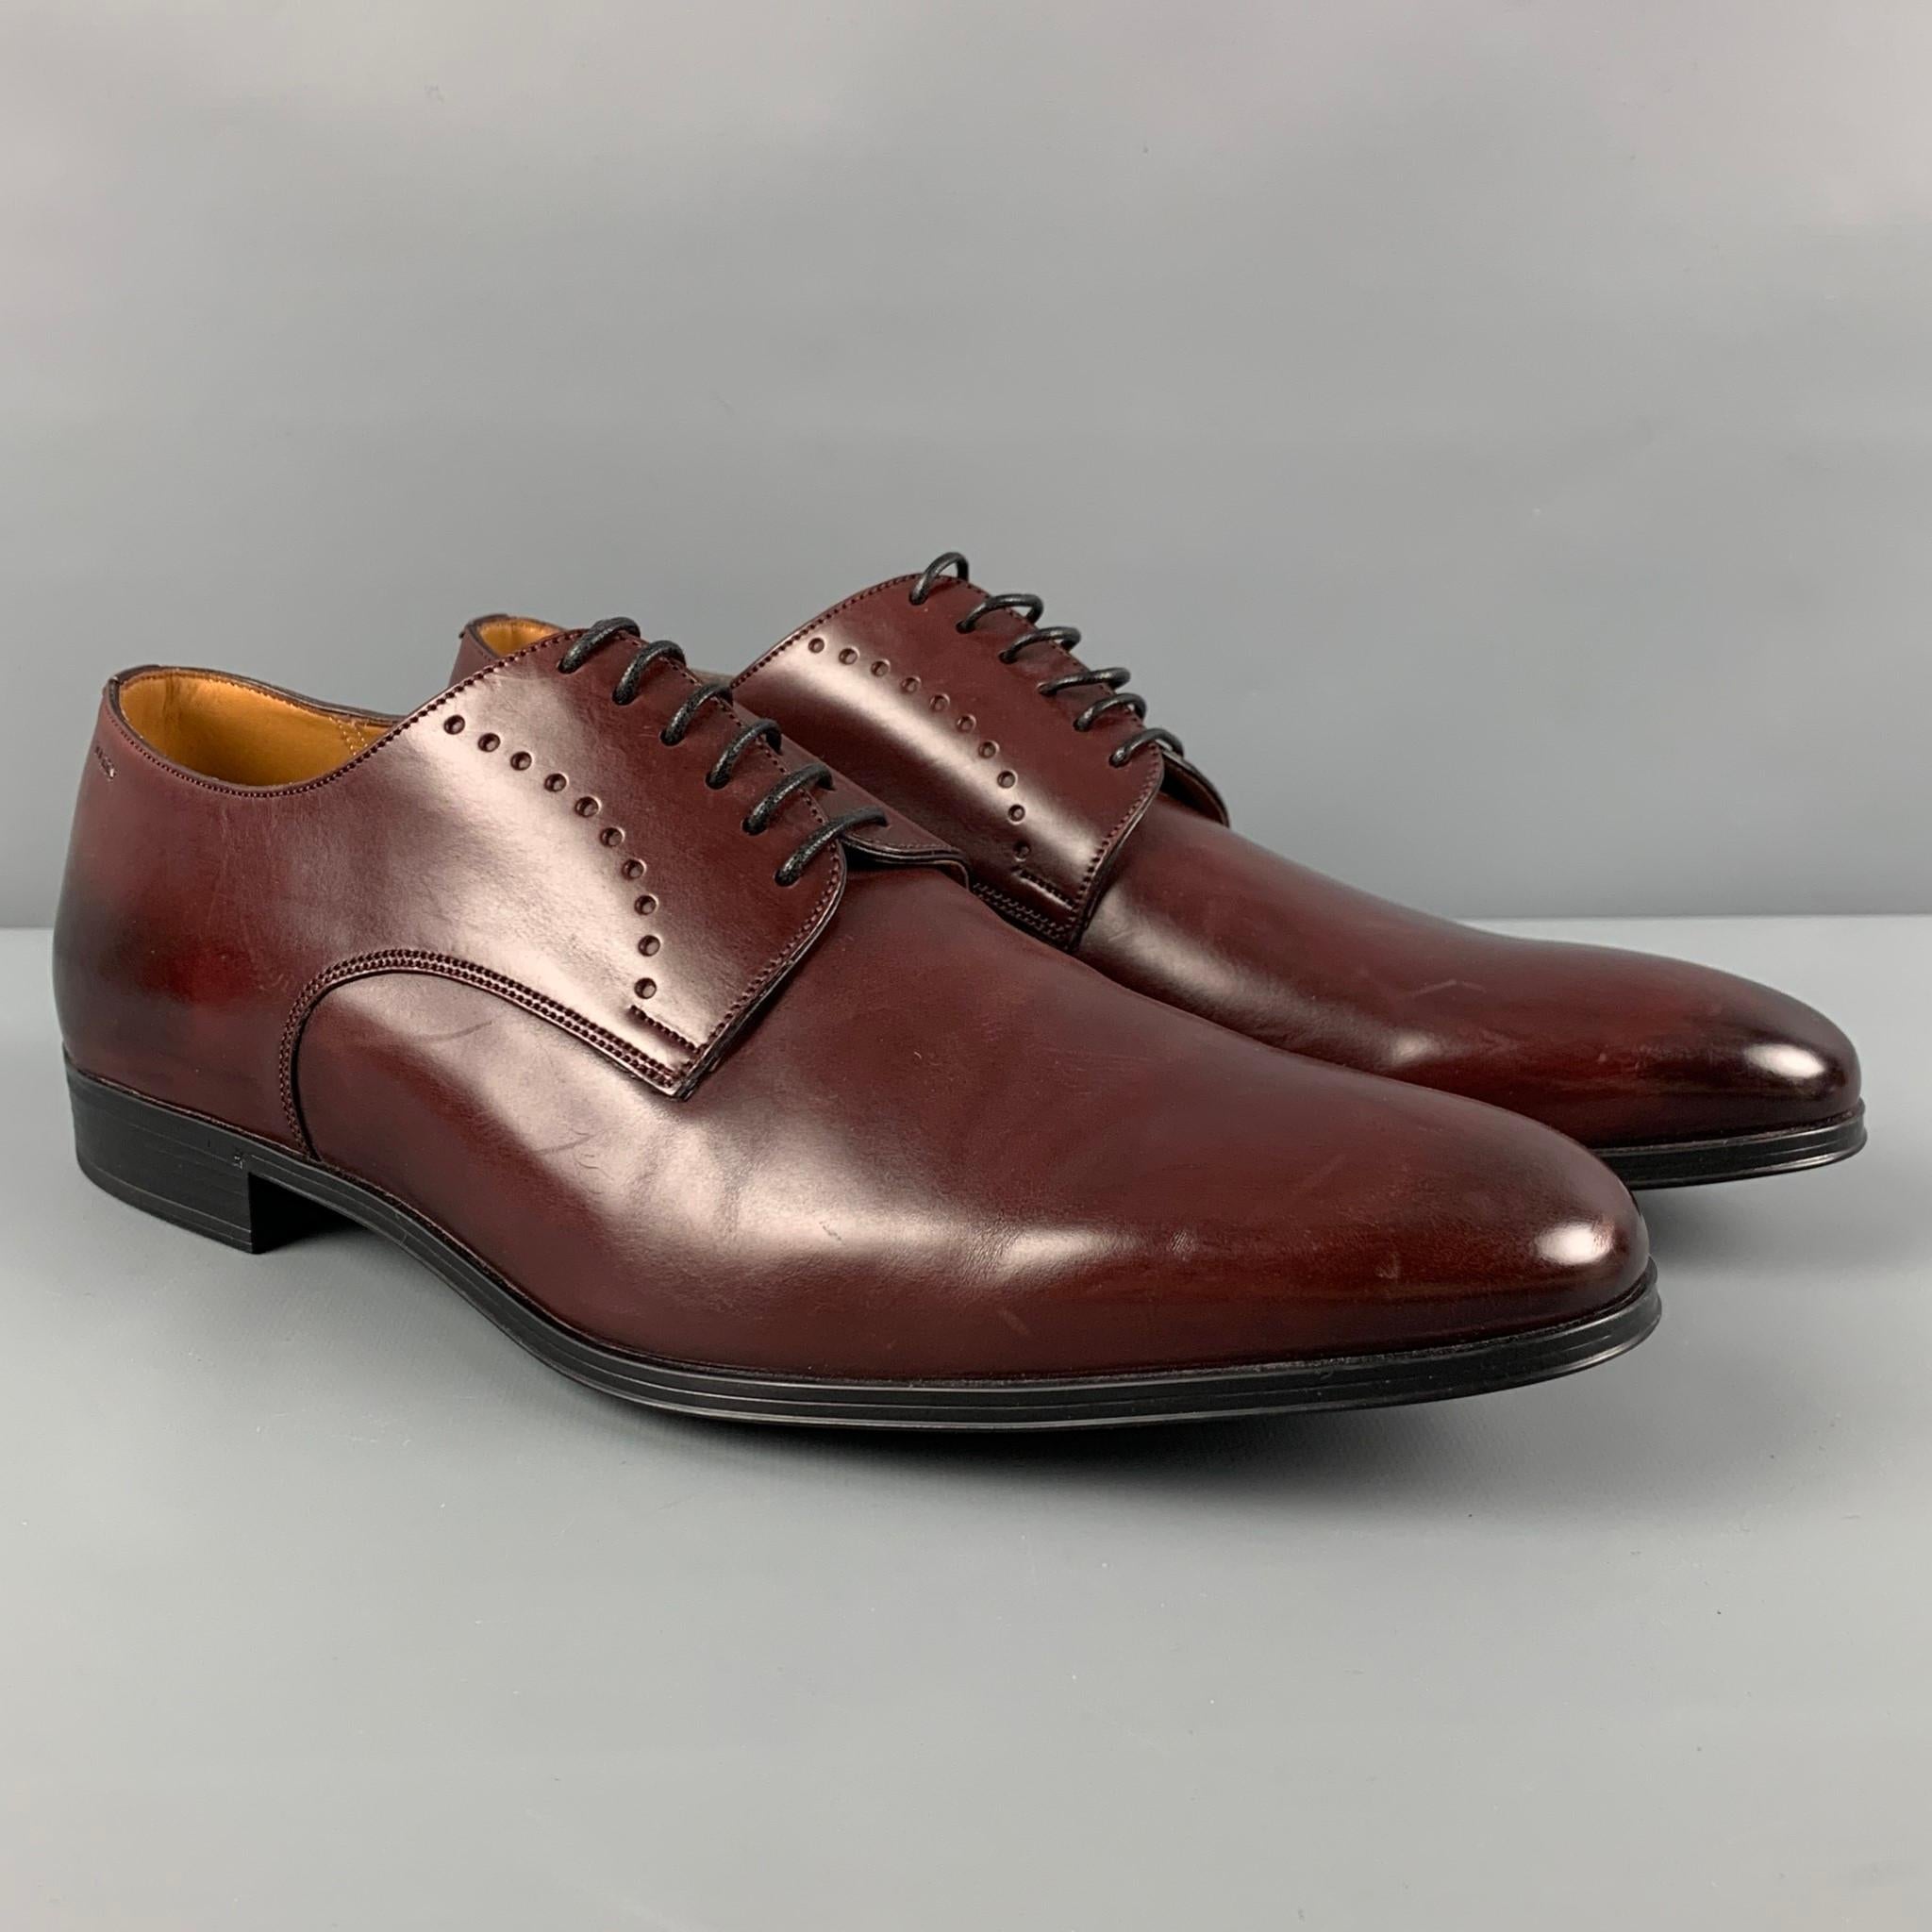 BALLY shoes comes in a burgundy leather featuring a classic style and a lace up closure. Made in Switzerland. 

Very Good Pre-Owned Condition.
Marked: 11.5

Outsole: 12.75 in. x 4 in. 